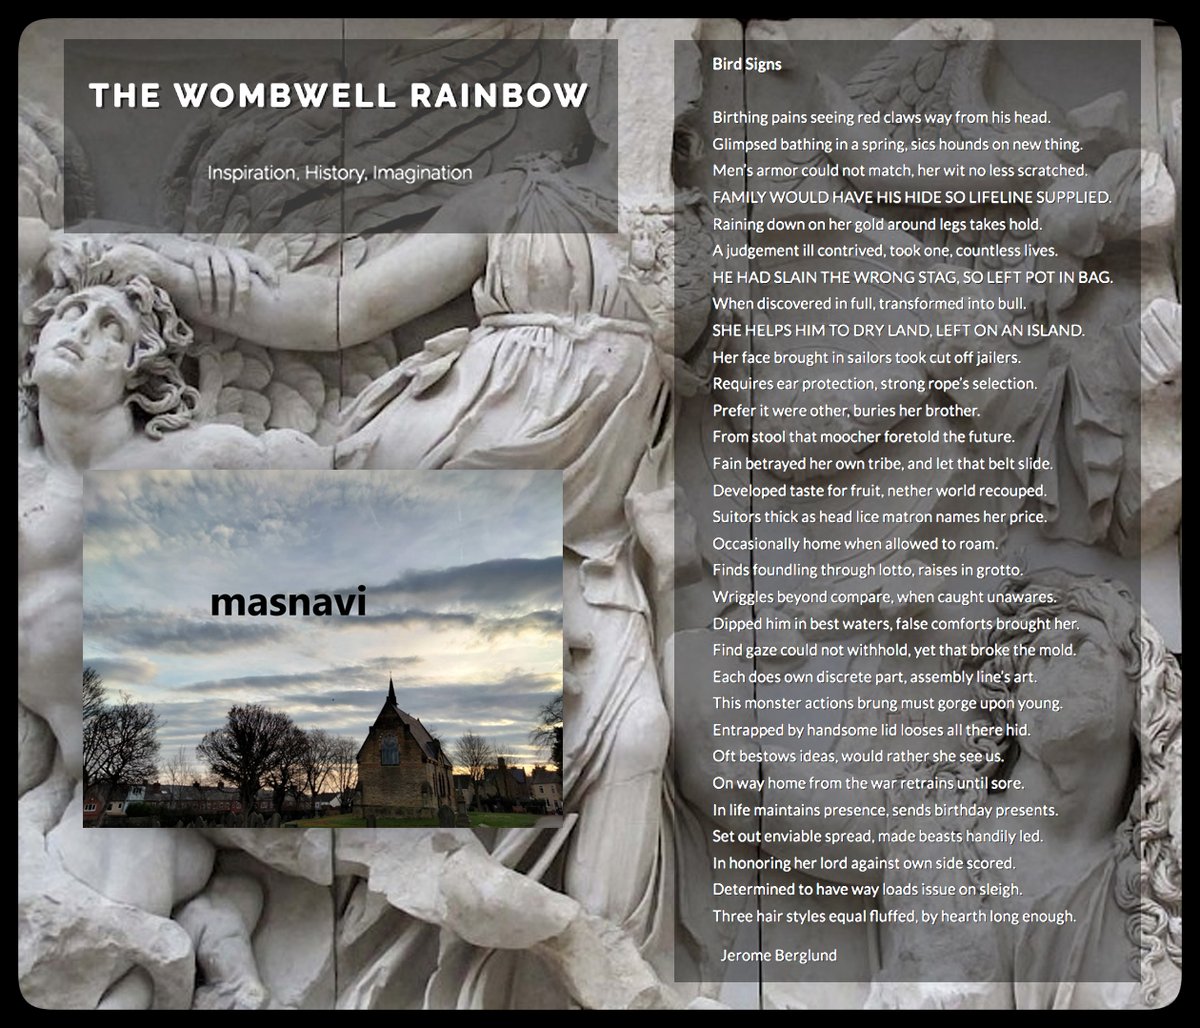 Very grateful to #WombwellRainbow editor @PaulDragonwolf1 for another stunning #Poeticformchallenge exploring #Masnavi.  Way to to go Marian , Tim, Jane, Robert on courageous exploration thrilling application of unfamiliar mode with rich & storied history!
thewombwellrainbow.com/2023/02/06/the…